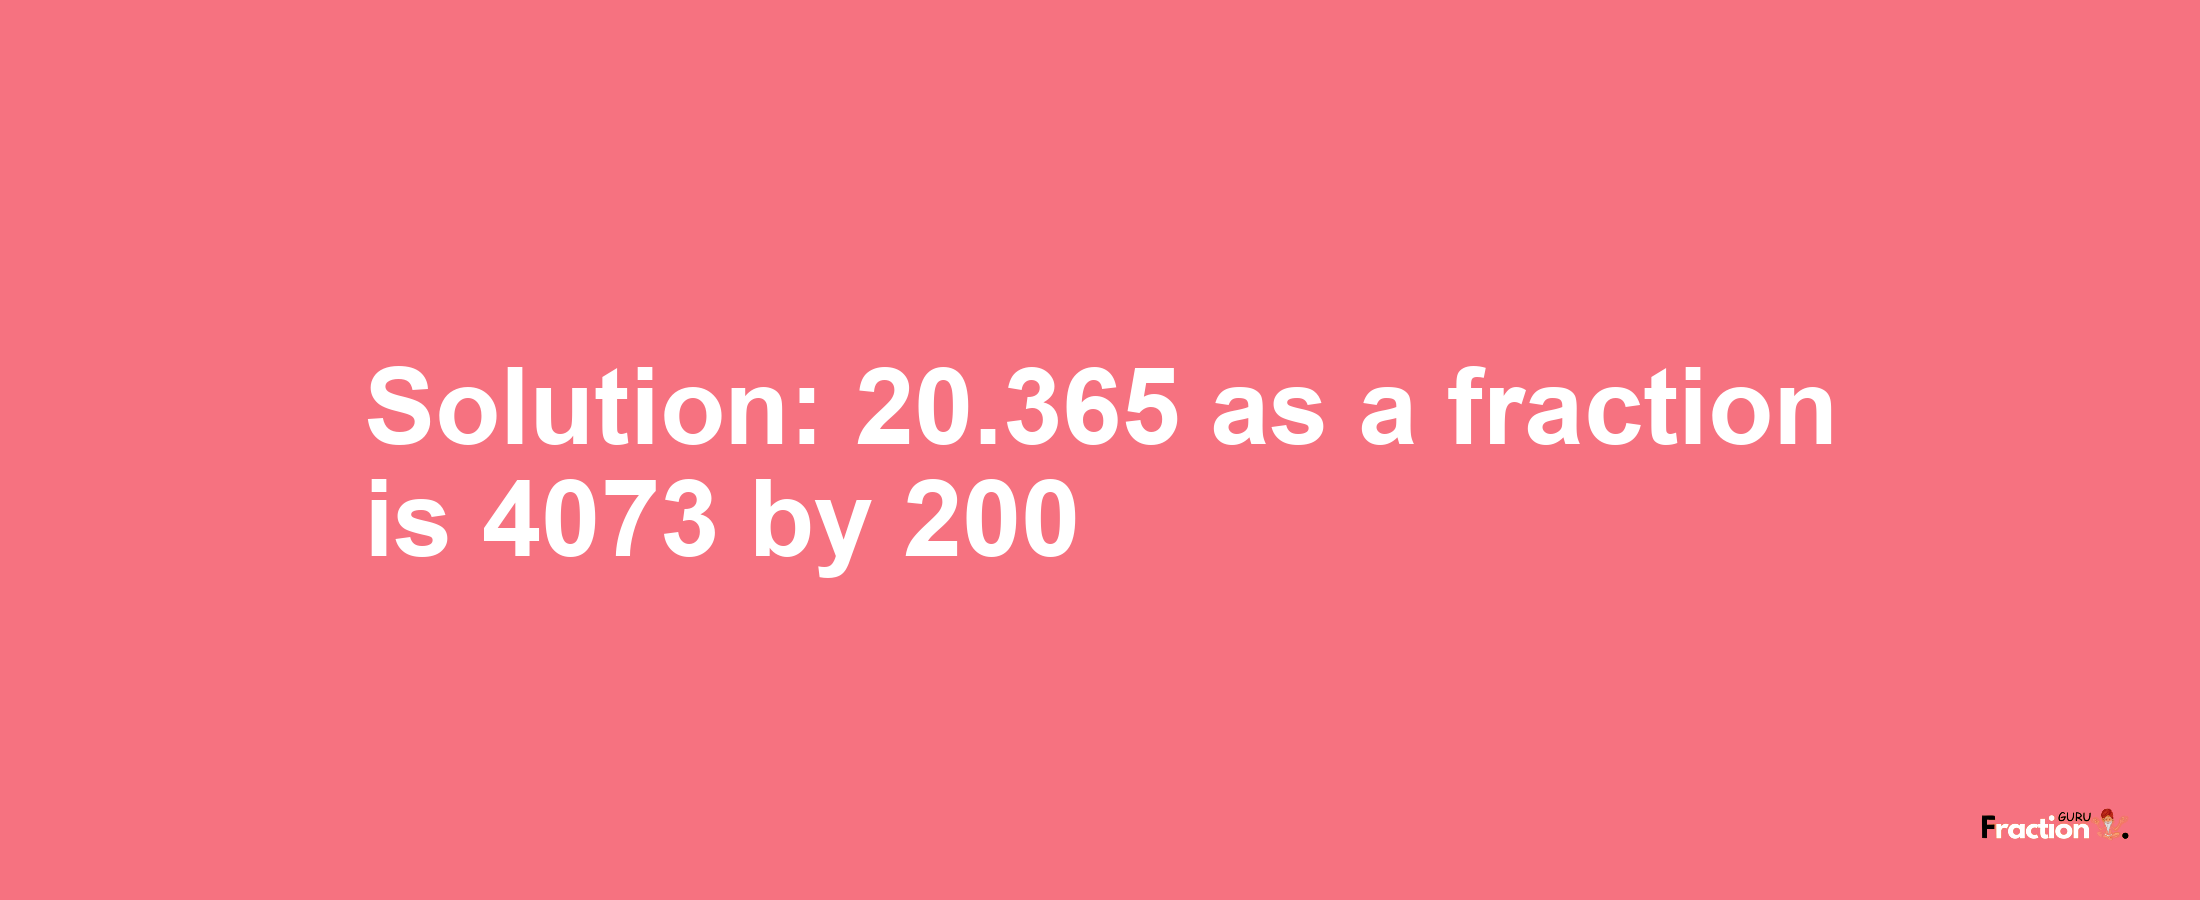 Solution:20.365 as a fraction is 4073/200